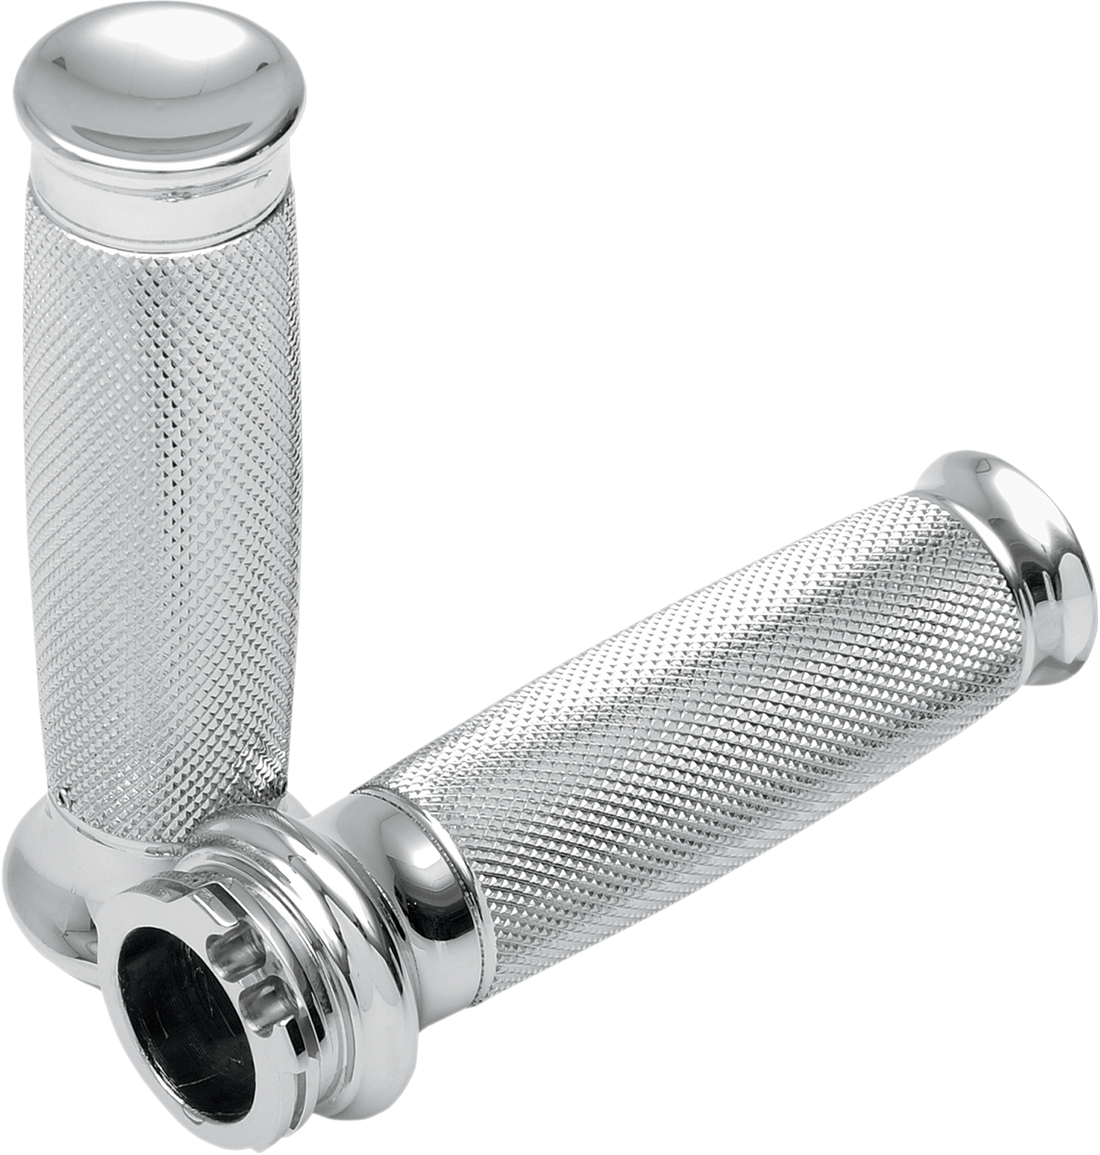 0630-0441 - TODD'S CYCLE Grips - Vice - Knurled - Chrome VGK-1